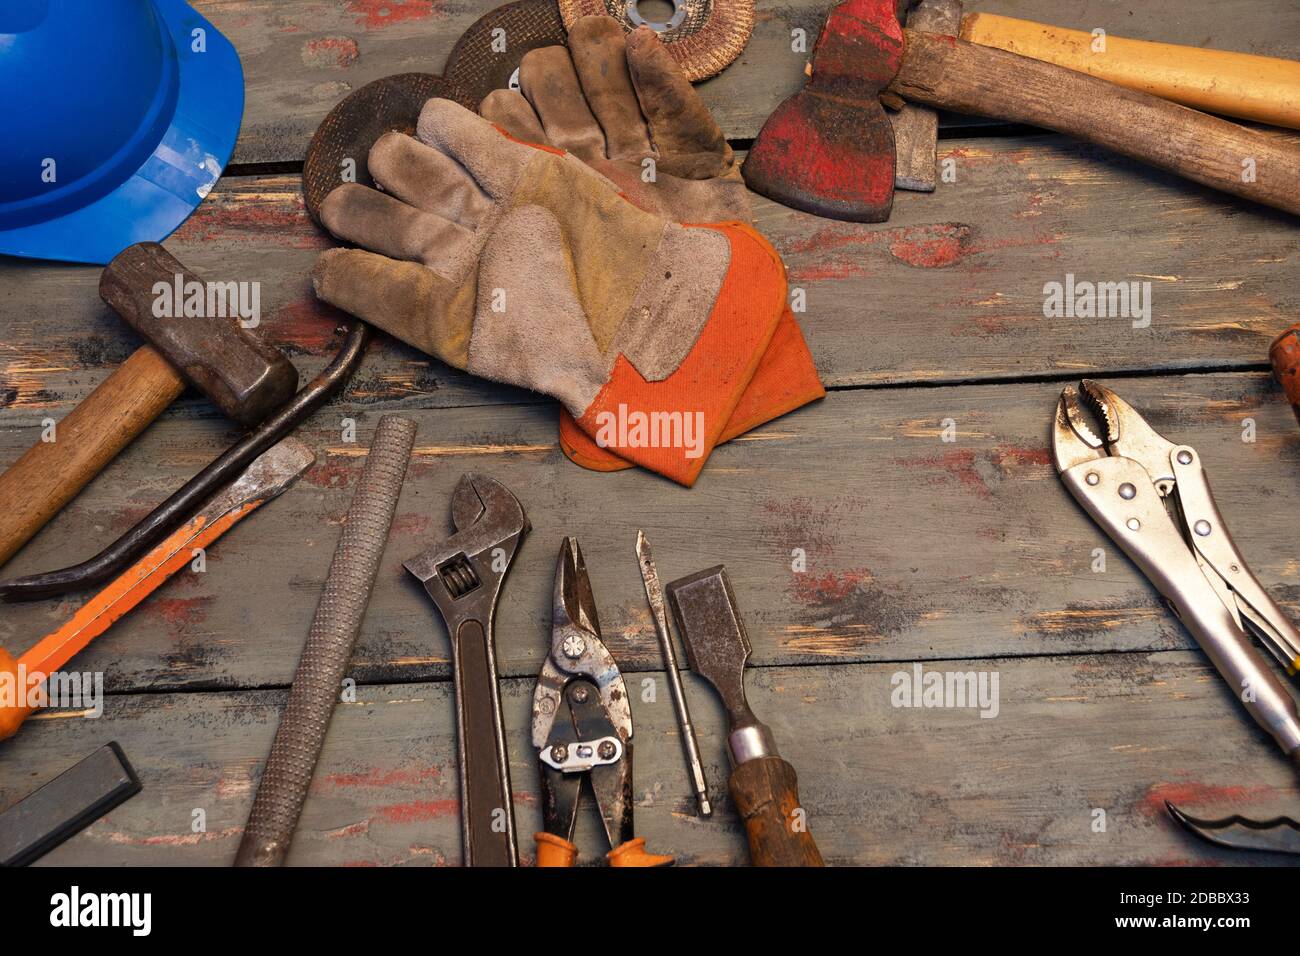 tools used for work at home or industry Stock Photo